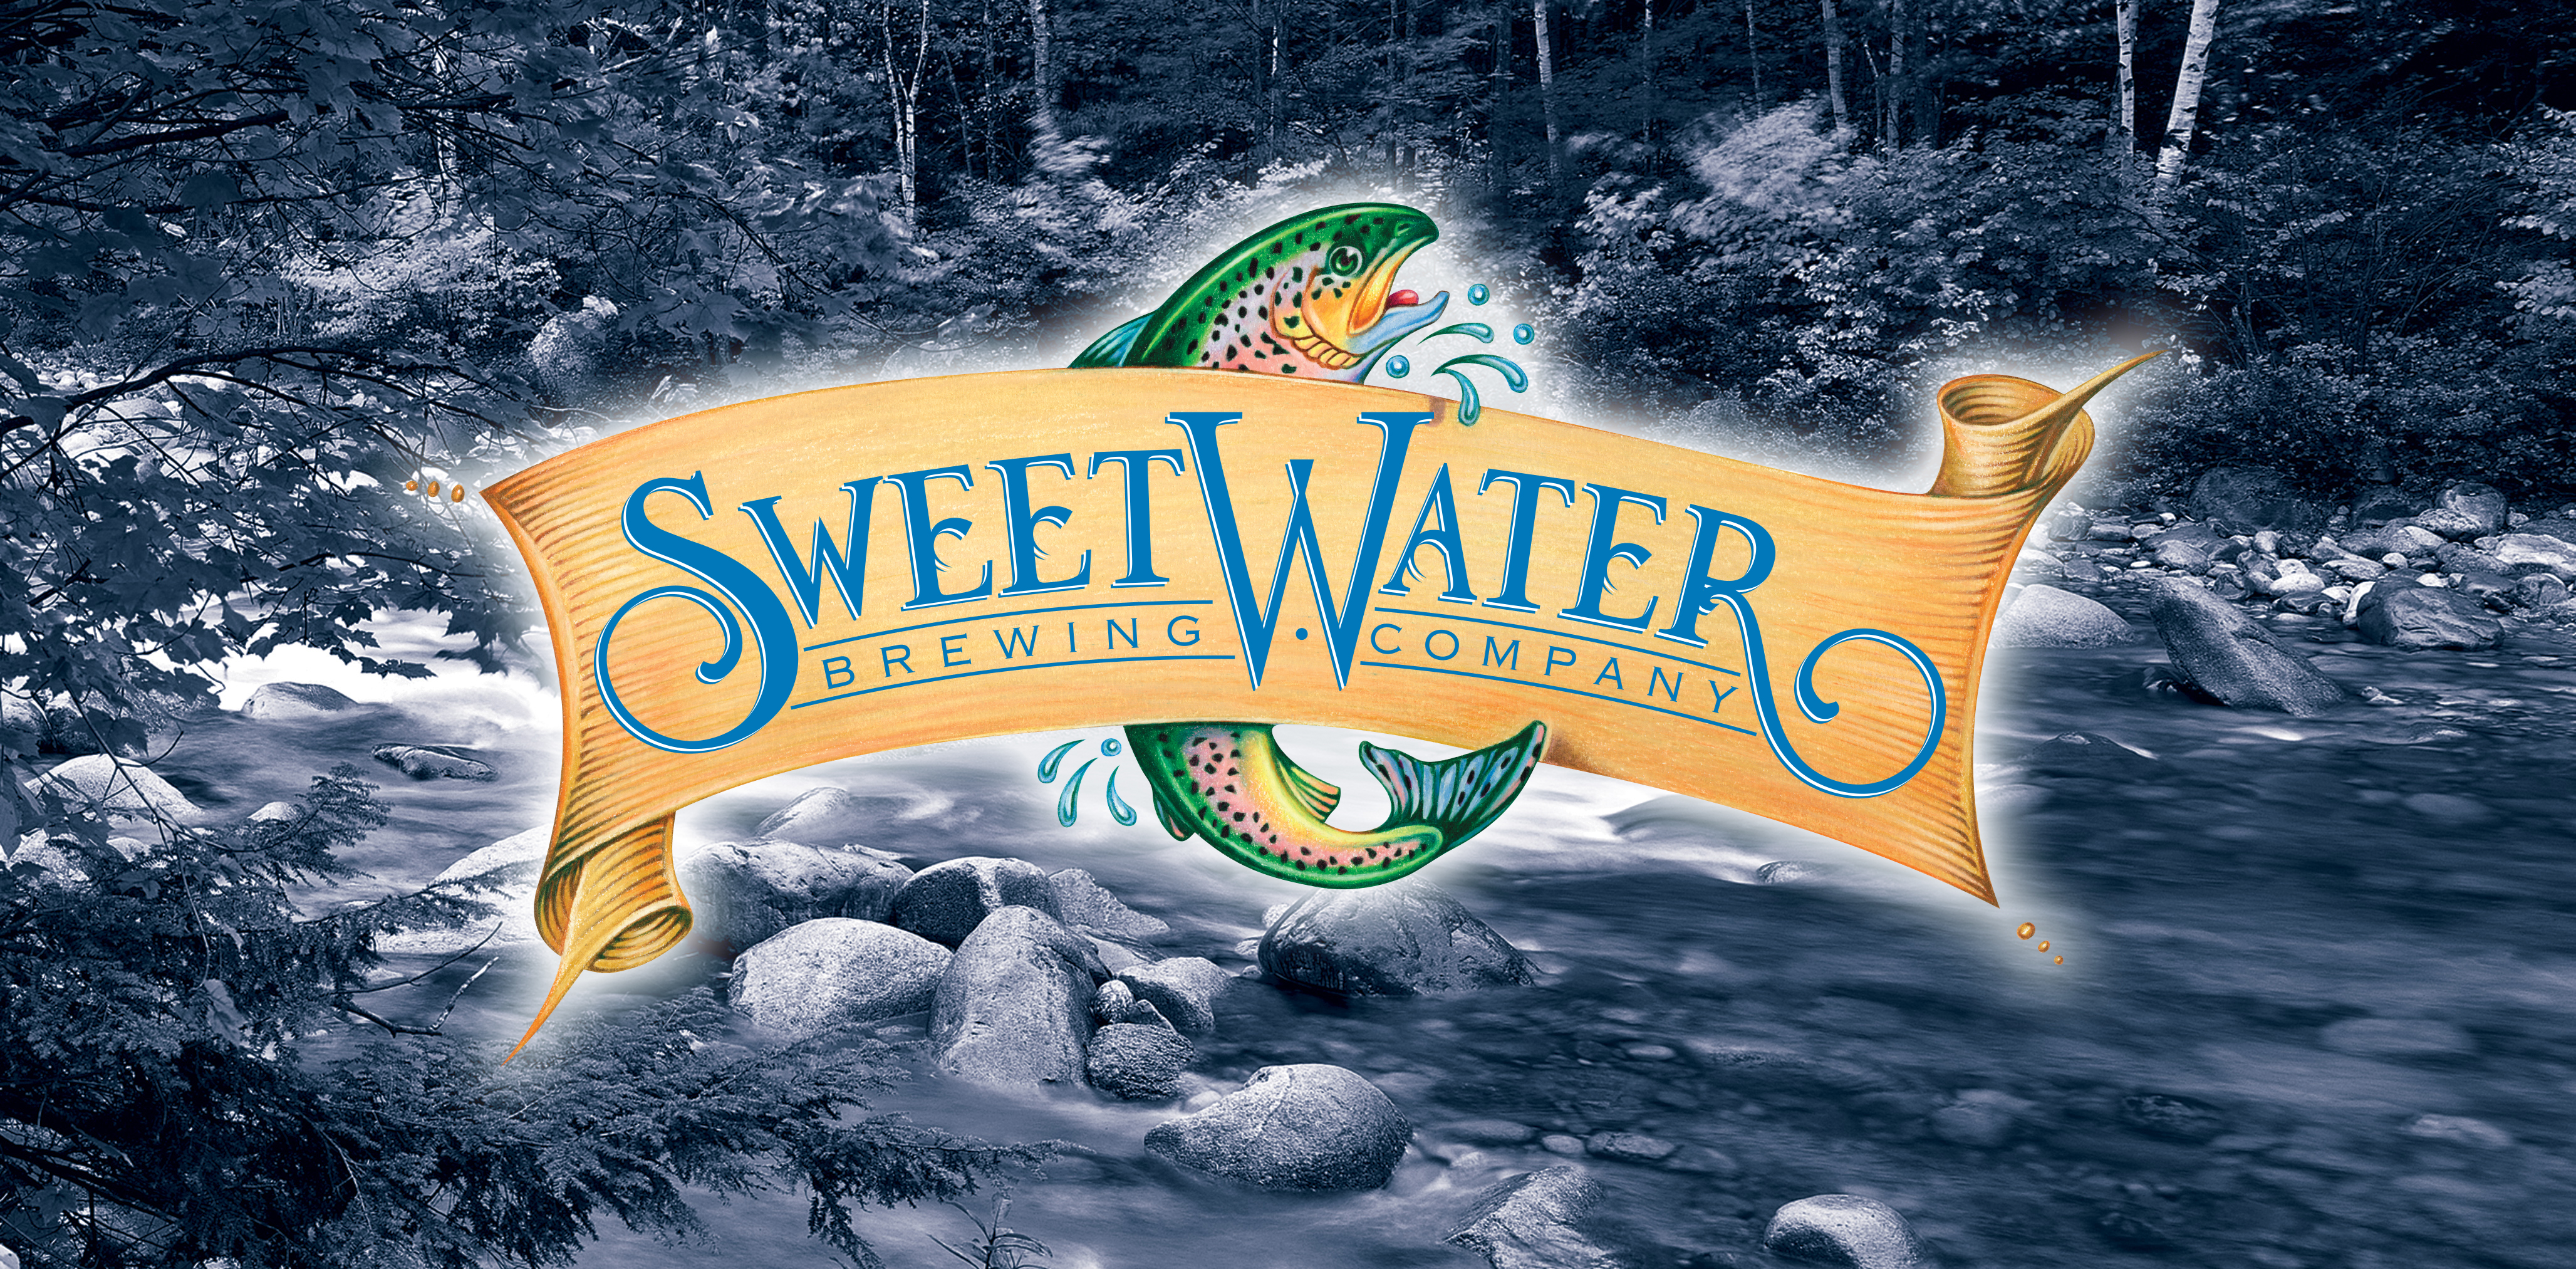 sweetwater brewing company logo - Reporter Newspapers